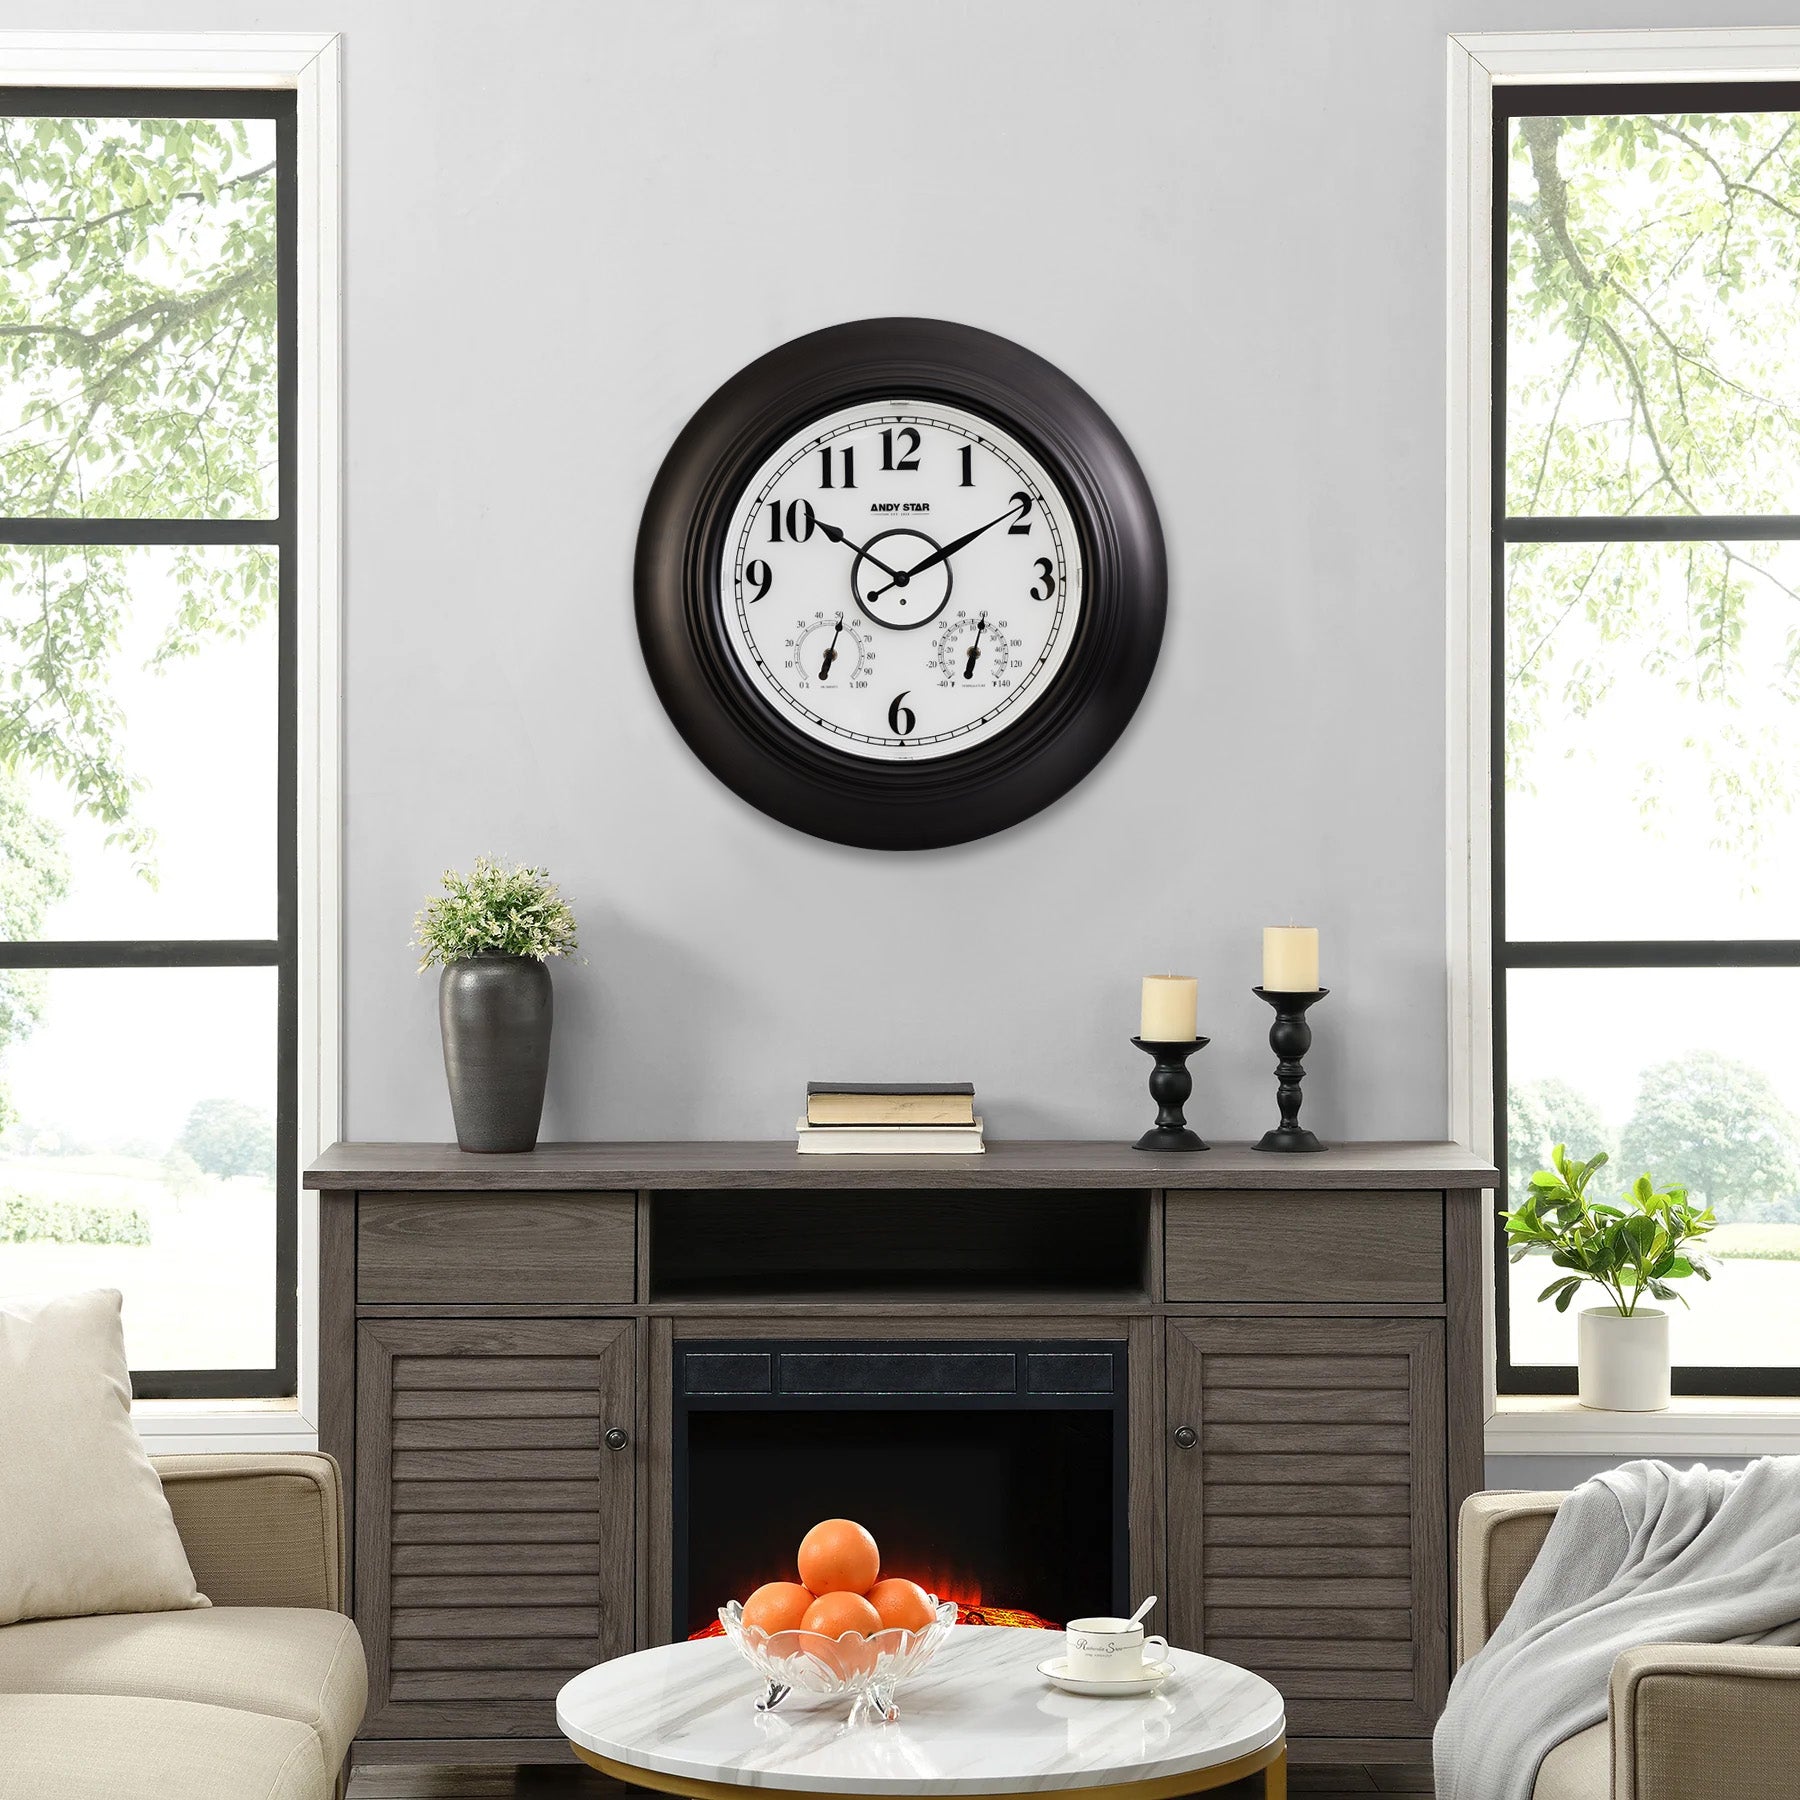 Contemporary Illuminated Indoor & Outdoor Wall Clock with Thermometer Weatherproof Waterproof Large Clocks for Living Room, Patio, Garden